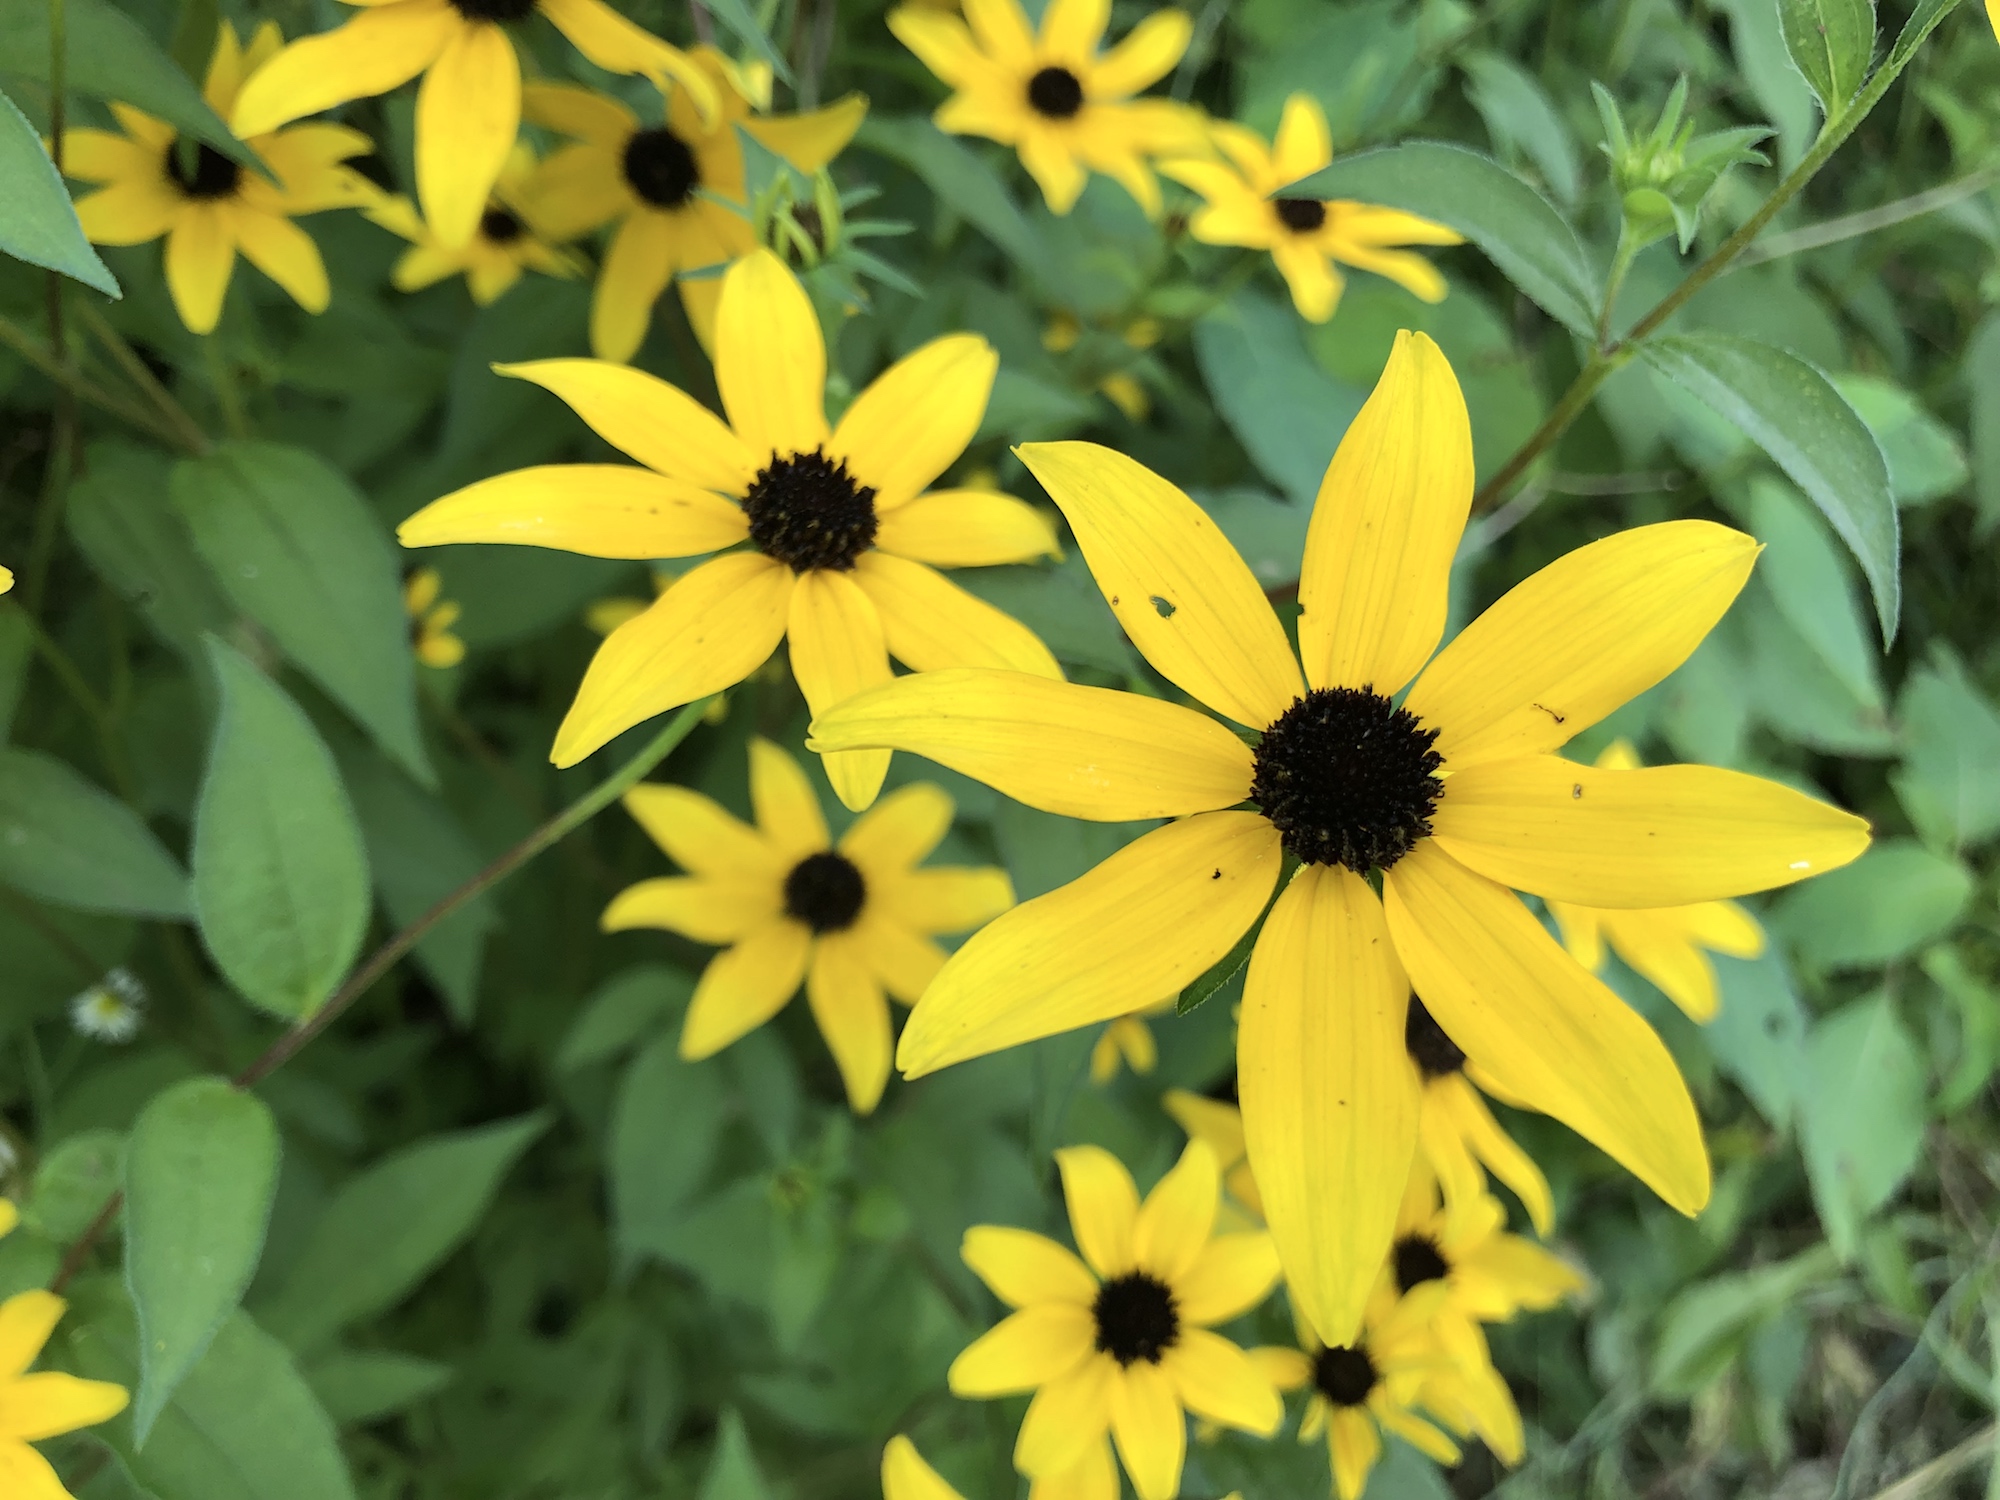 Brown-eyed Susan on banks of retaining pond in Madison, Wisconsin on July 25, 2019.